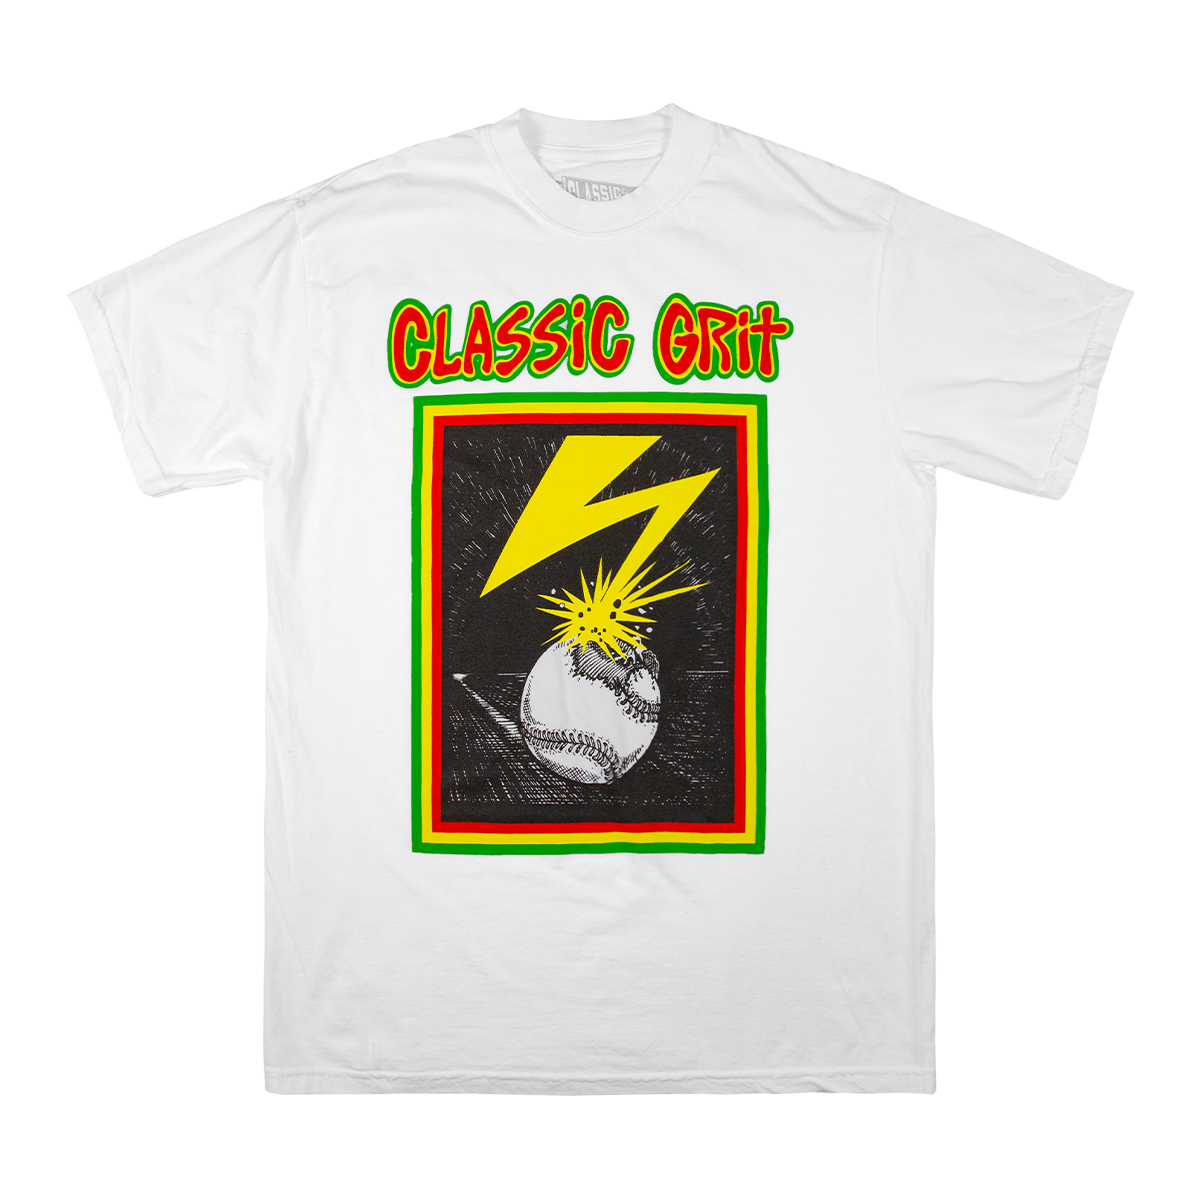 Vintage Style Bad Brains Acid Washed Band T-Shirt 3D sold by Tring Tee, SKU 145317